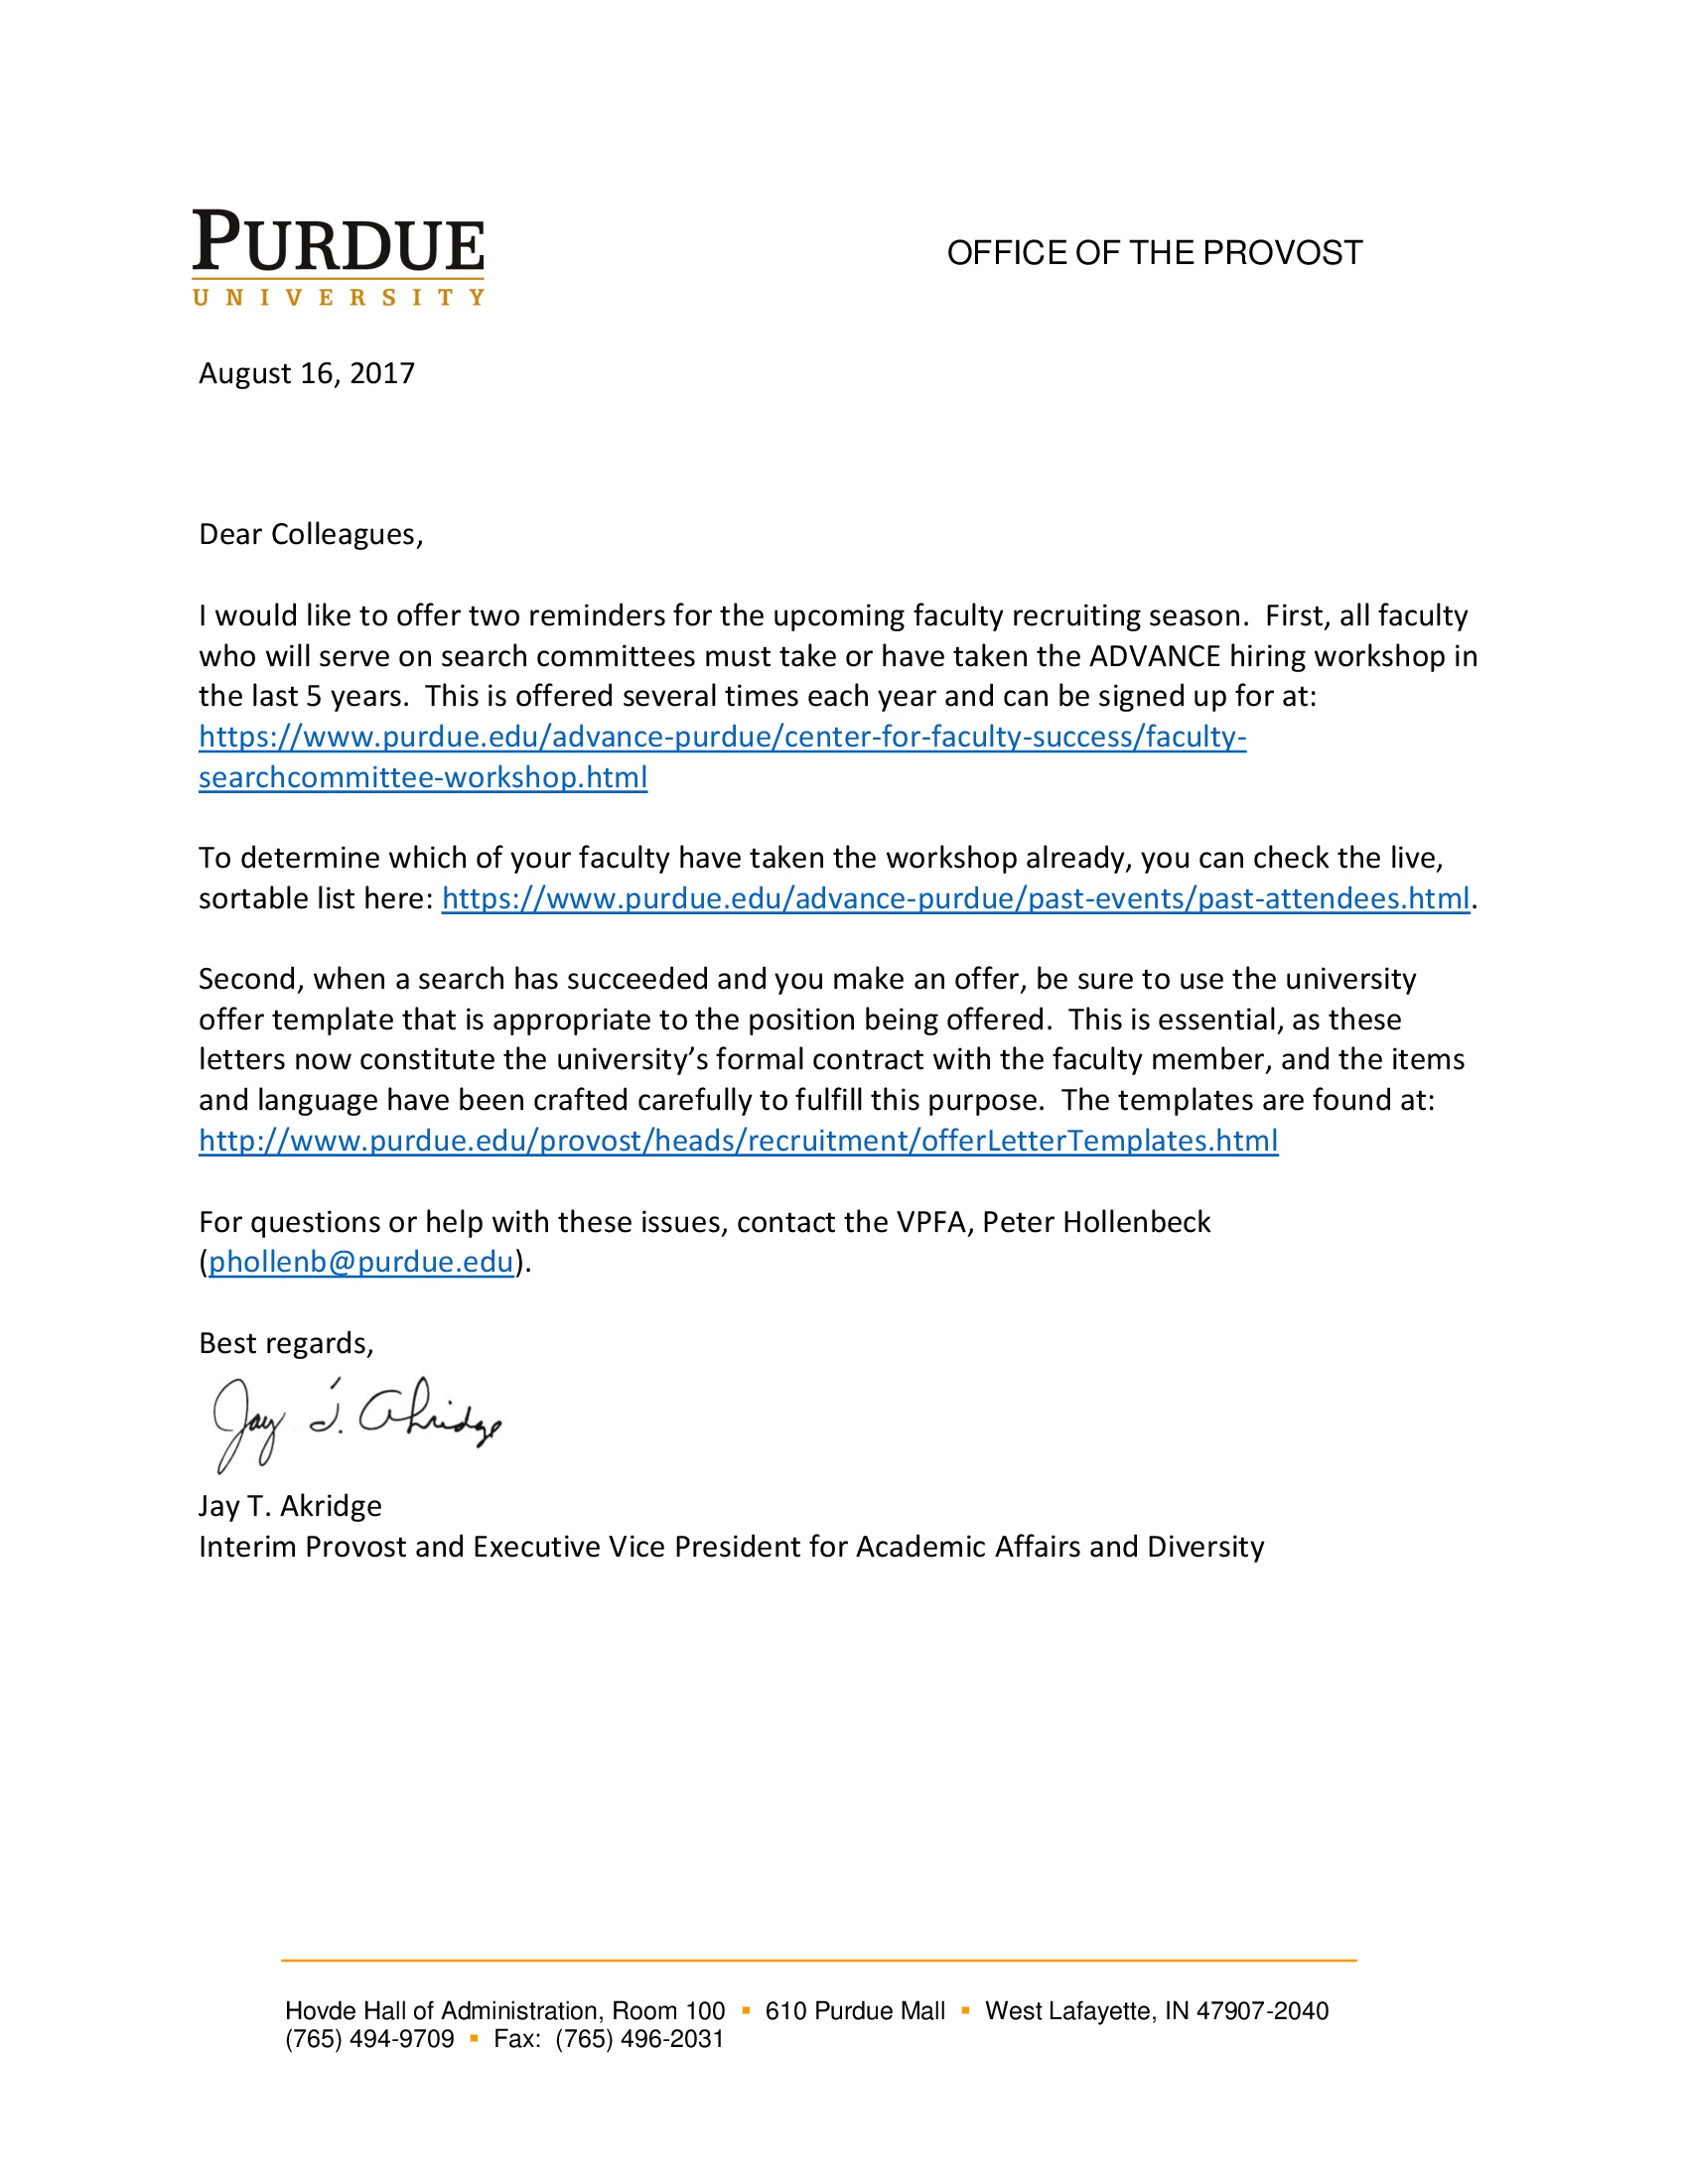 Letter from the Provost